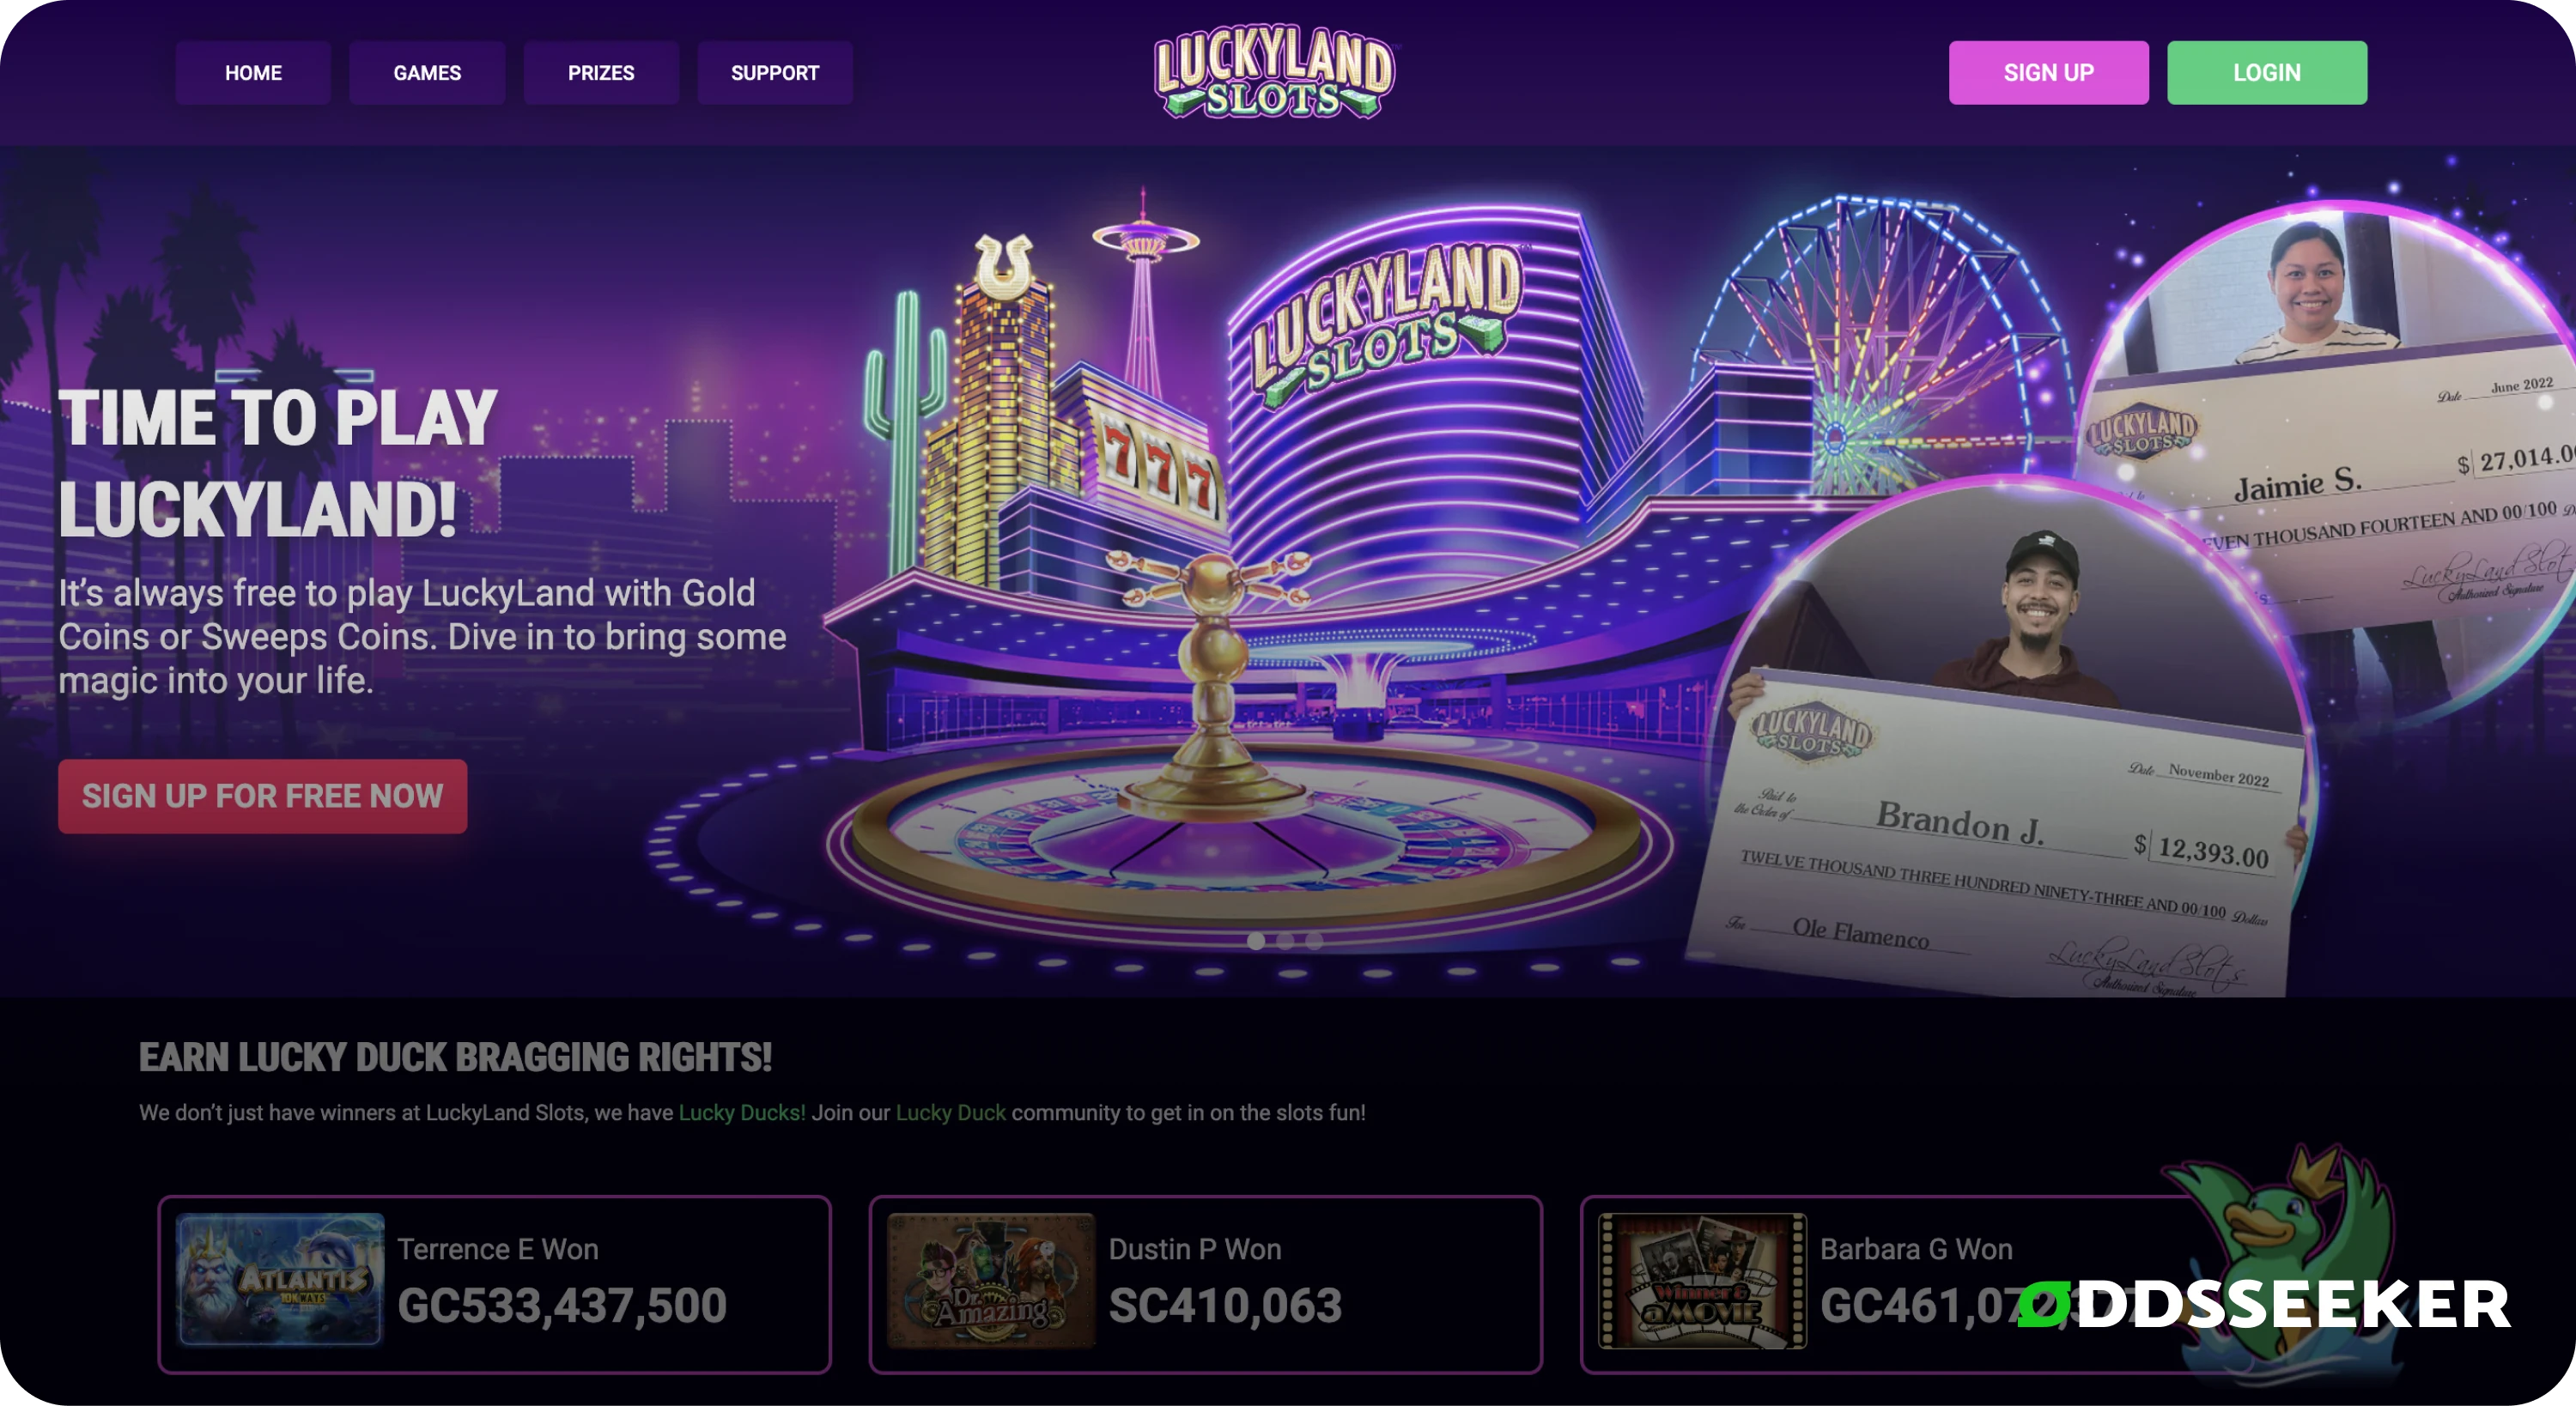 Luckyland slots login page for free sweeps coins